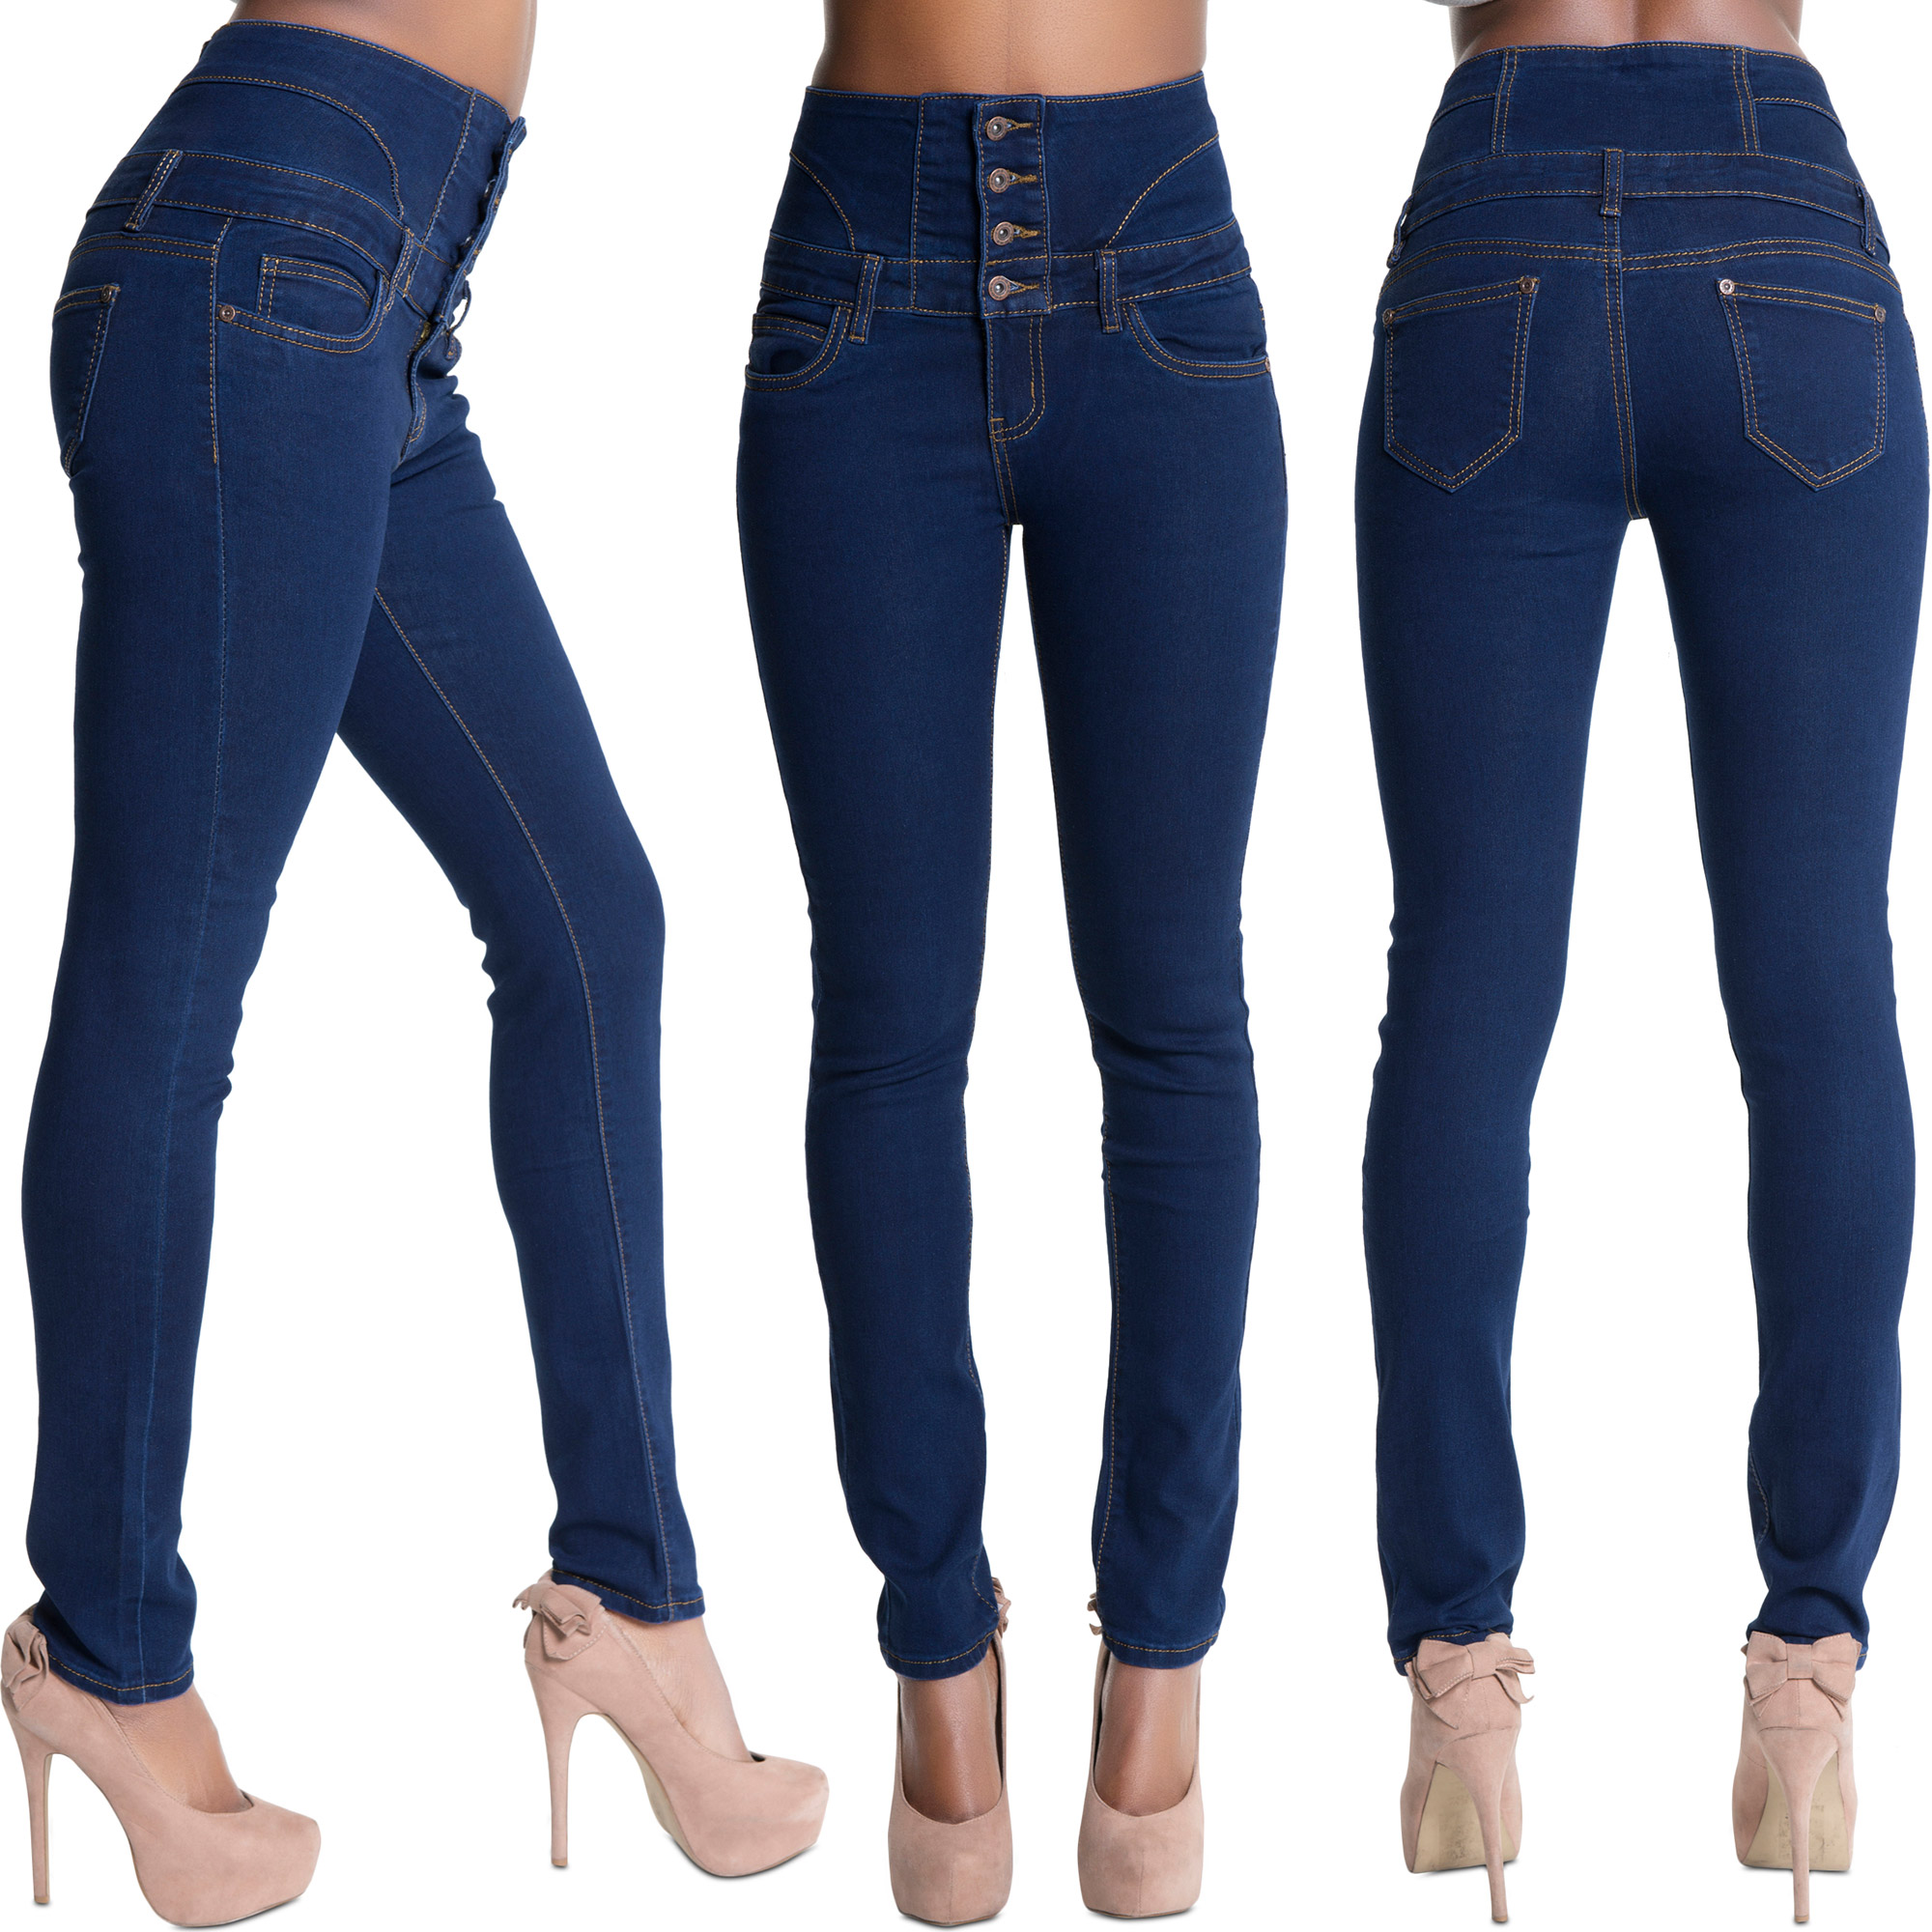 Womens High Waisted Sexy Skinny Fit Jeans Ladies Stretch Denim Jegging ...